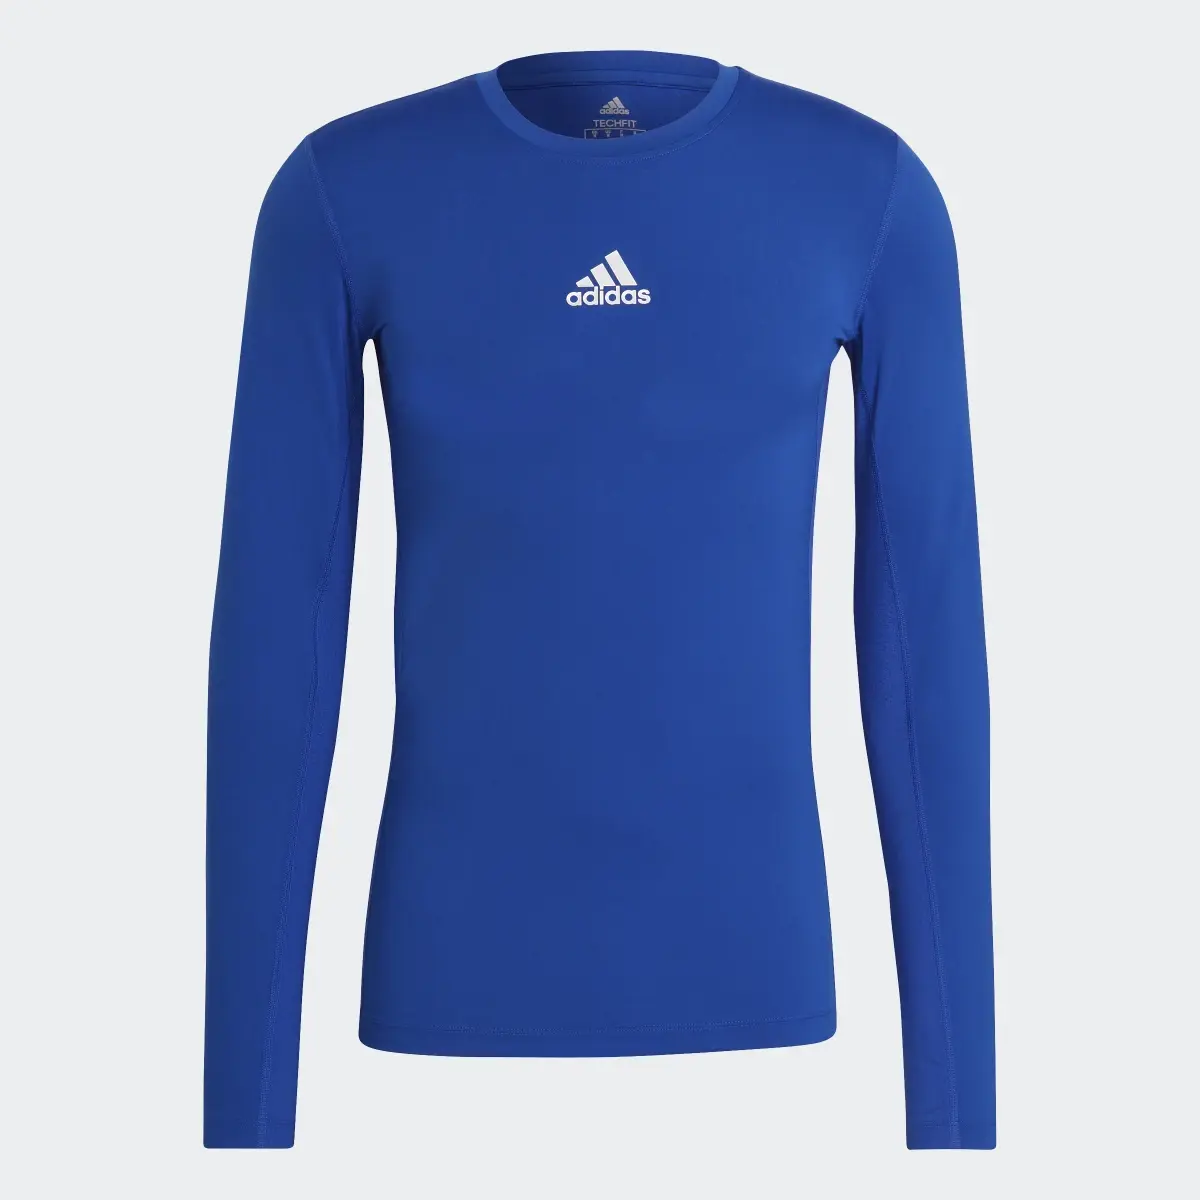 Adidas Compression Long-Sleeve Top. 1